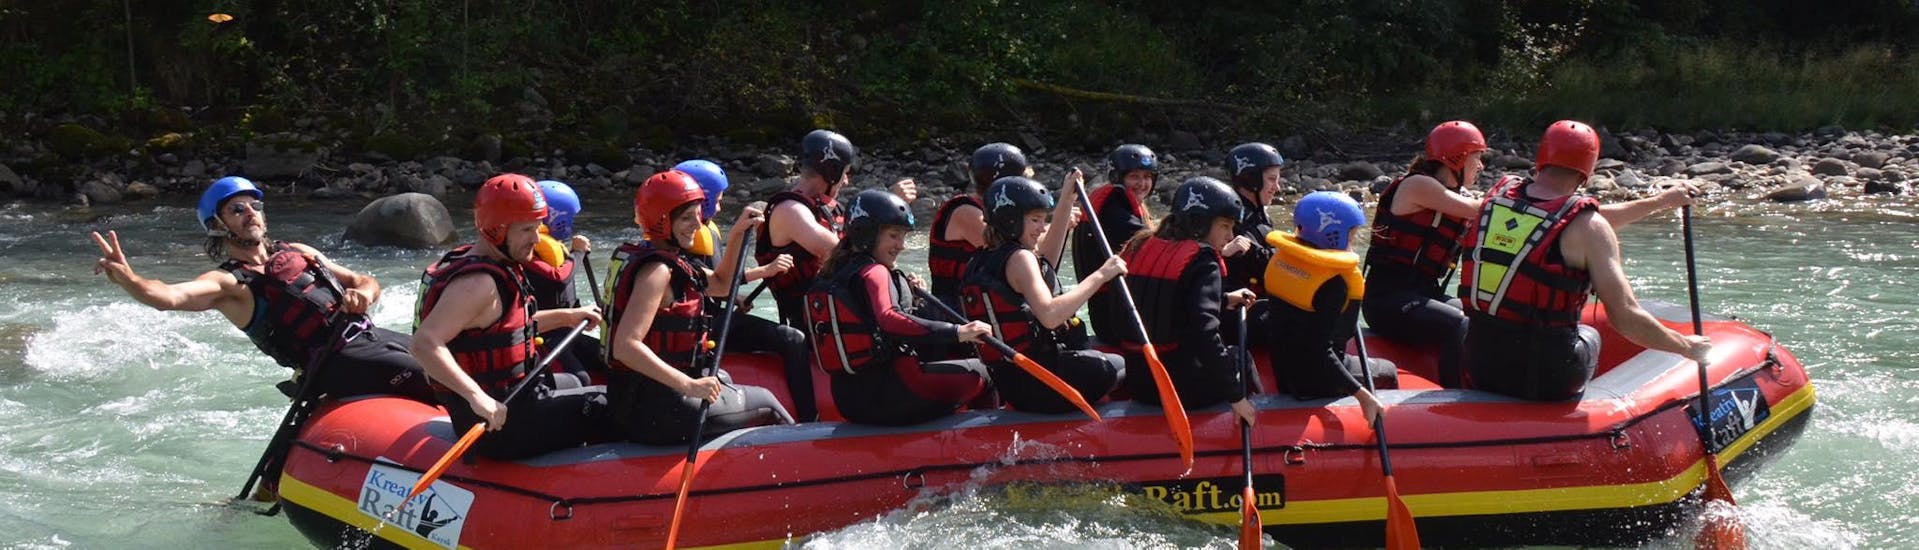 Rafting sul Rienza per Gruppi (15-40 pax) - Action & Safety.